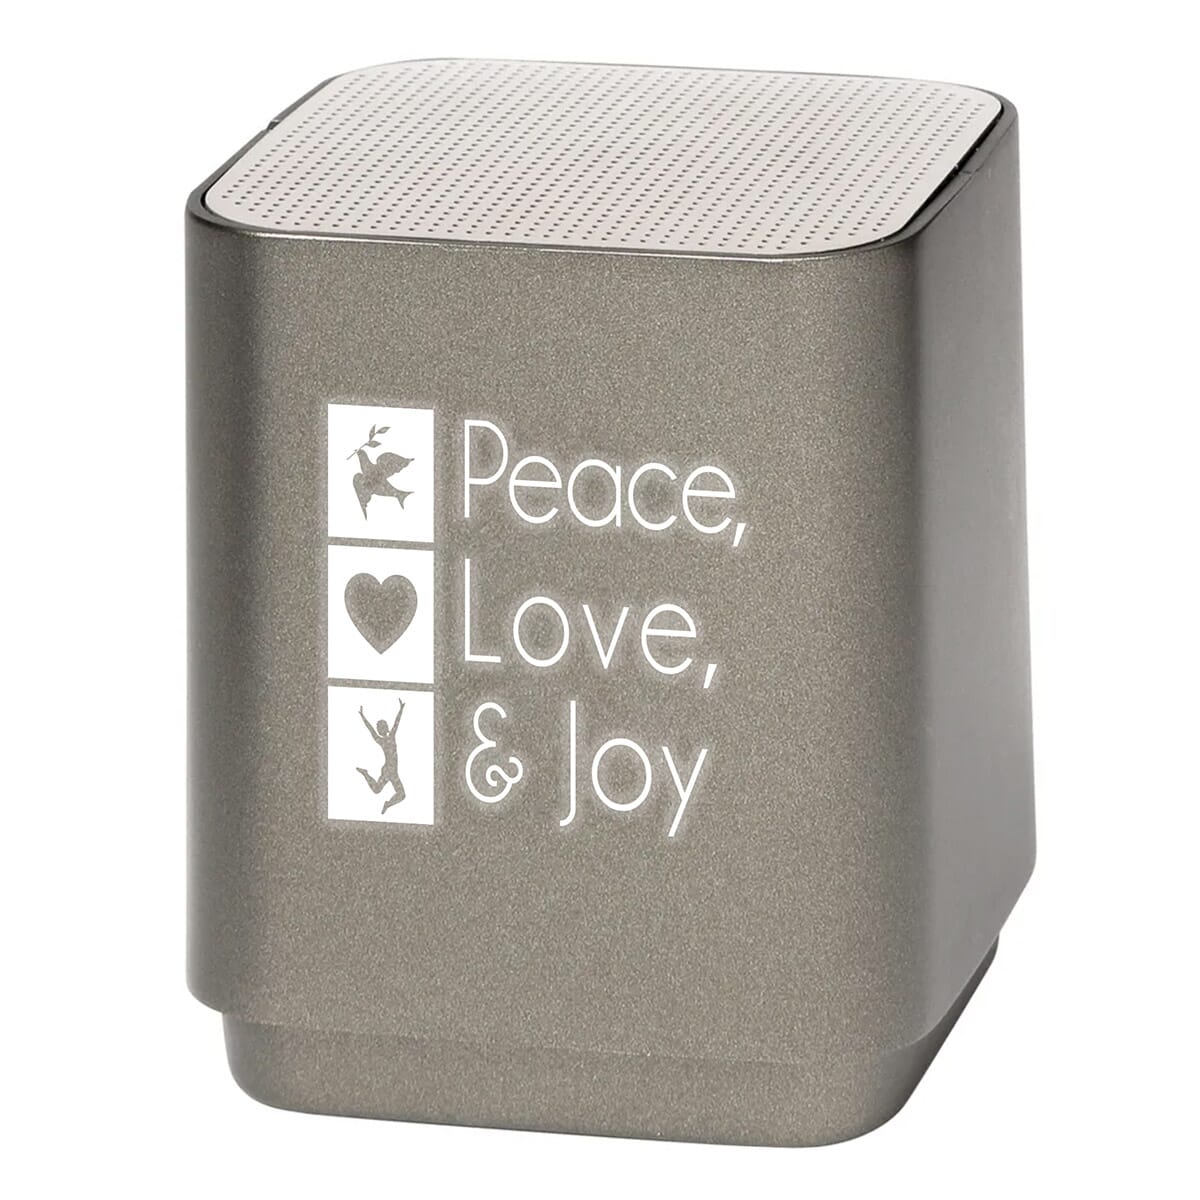 Bluetooth speaker with holiday imprint